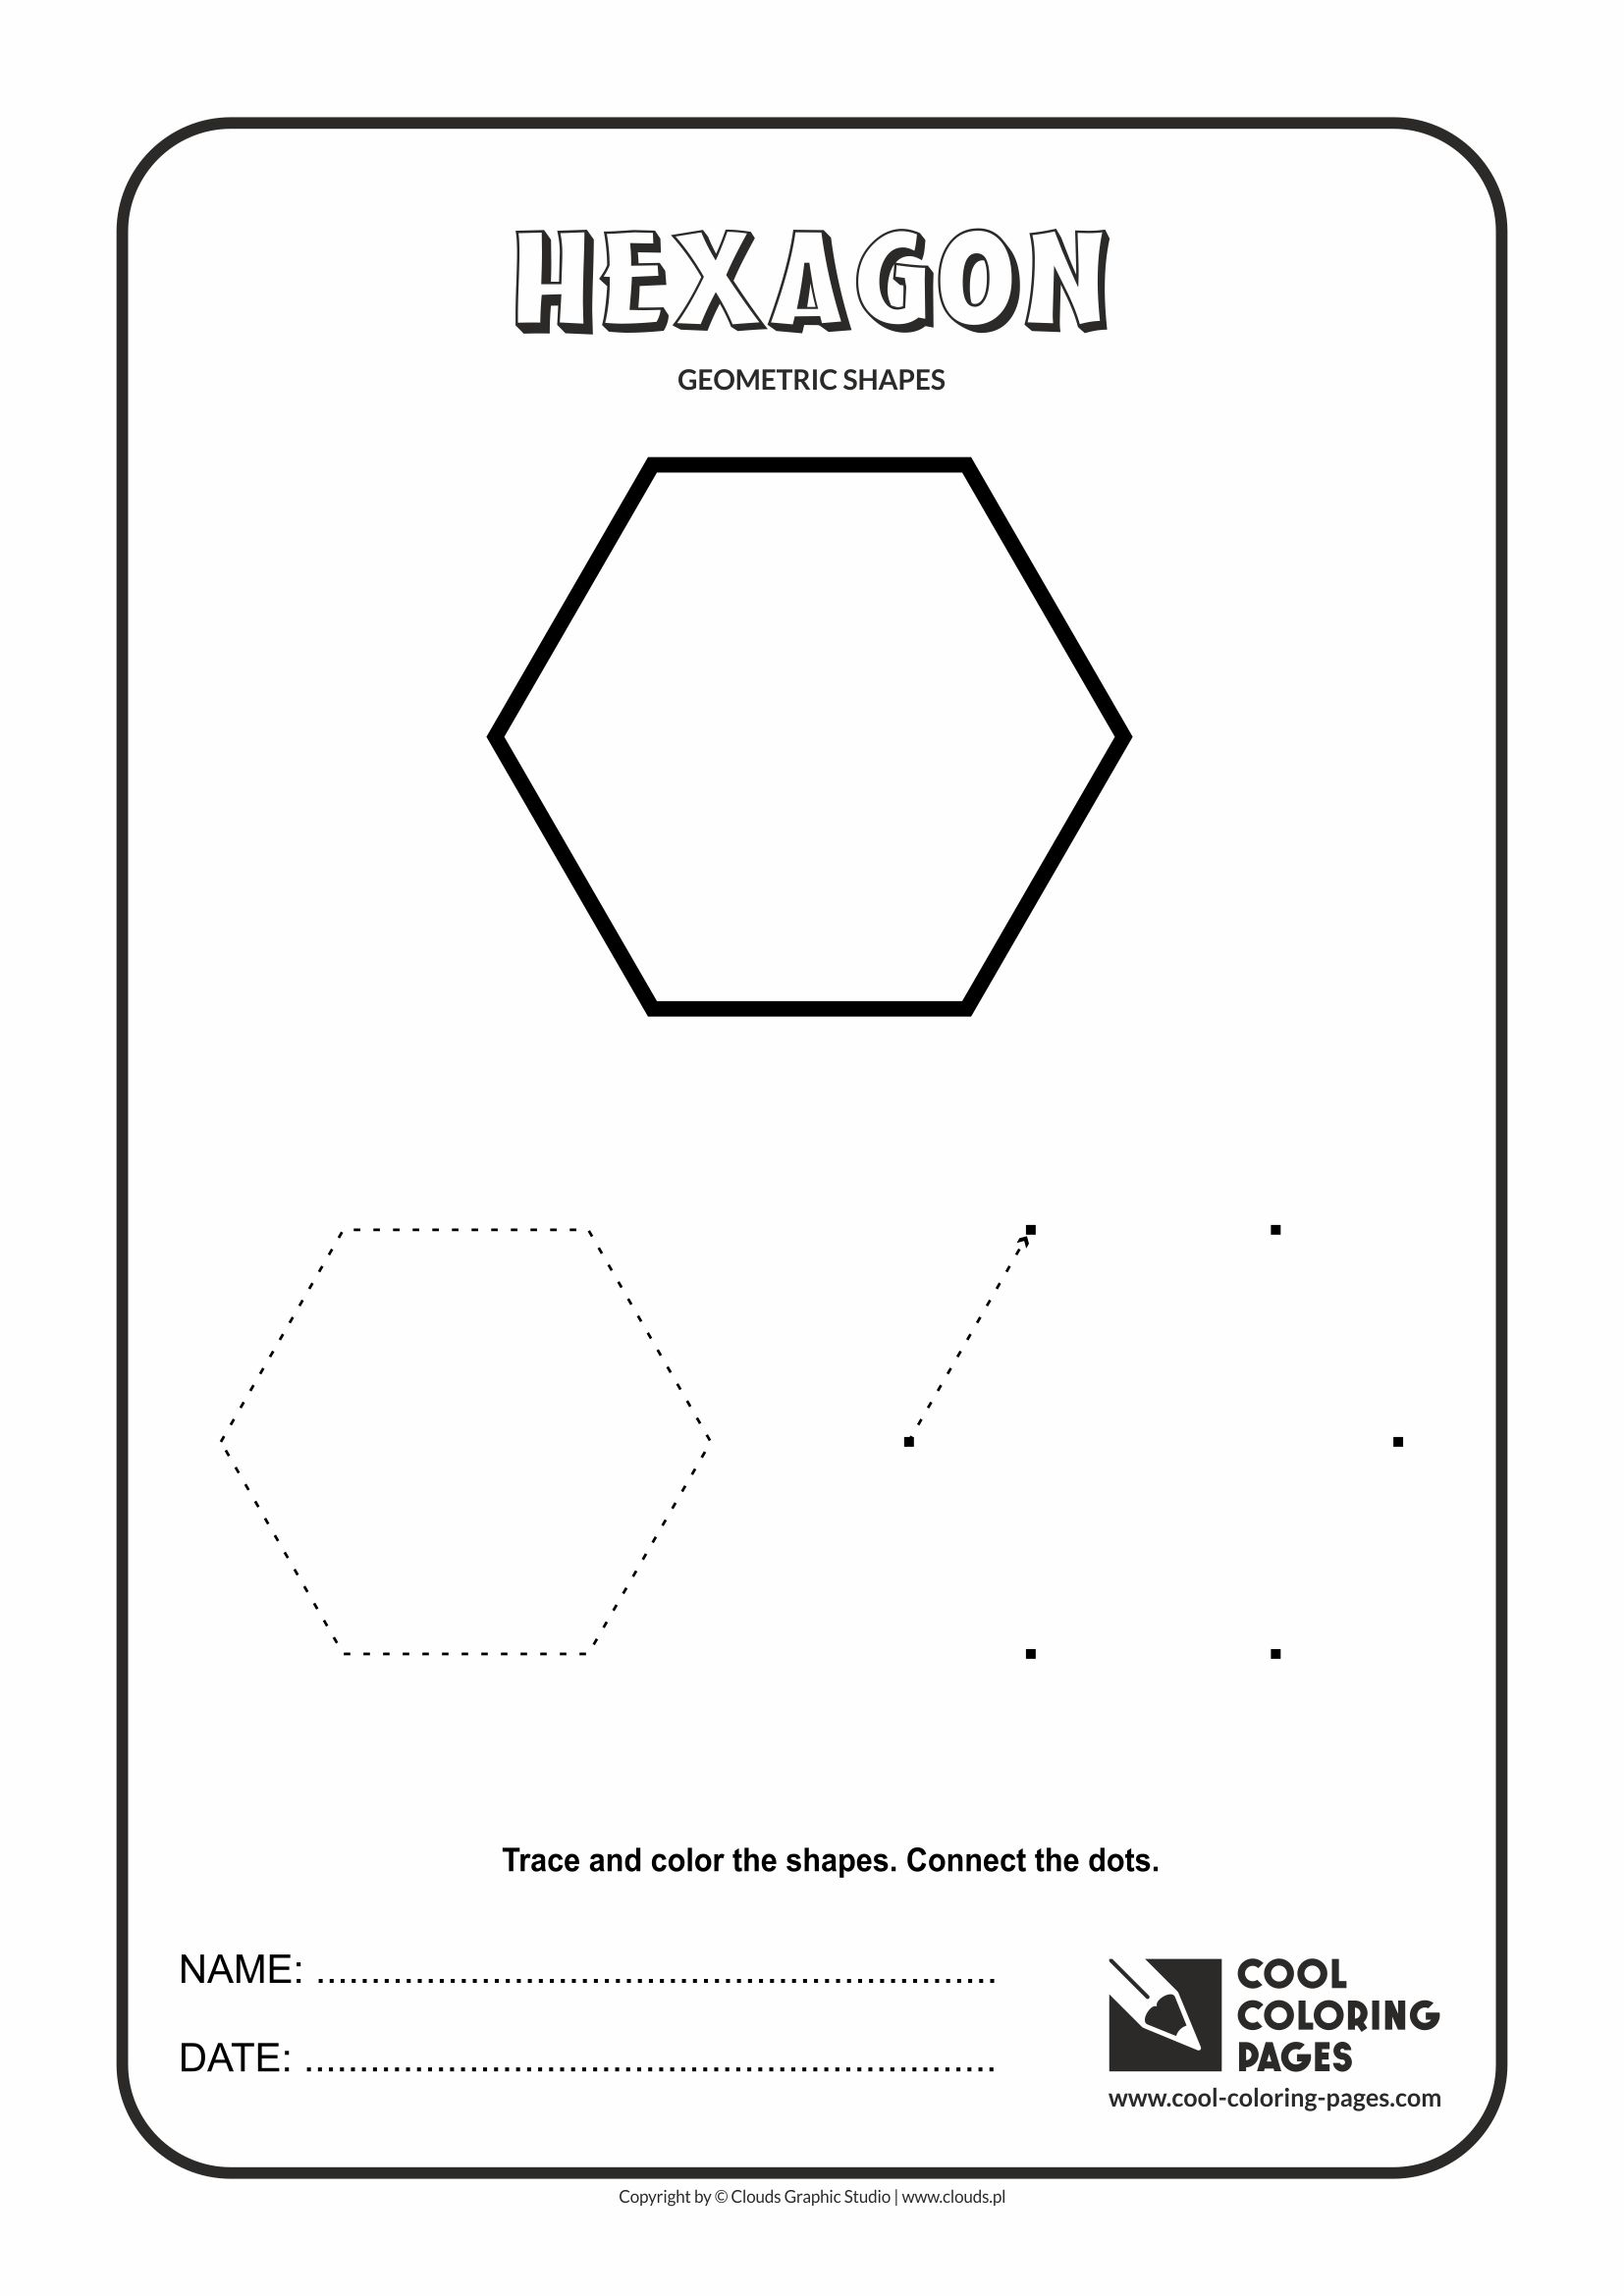 Cool Coloring Pages Geometric Shapes - Cool Coloring Pages | Free - Free Printable Geometric Shapes